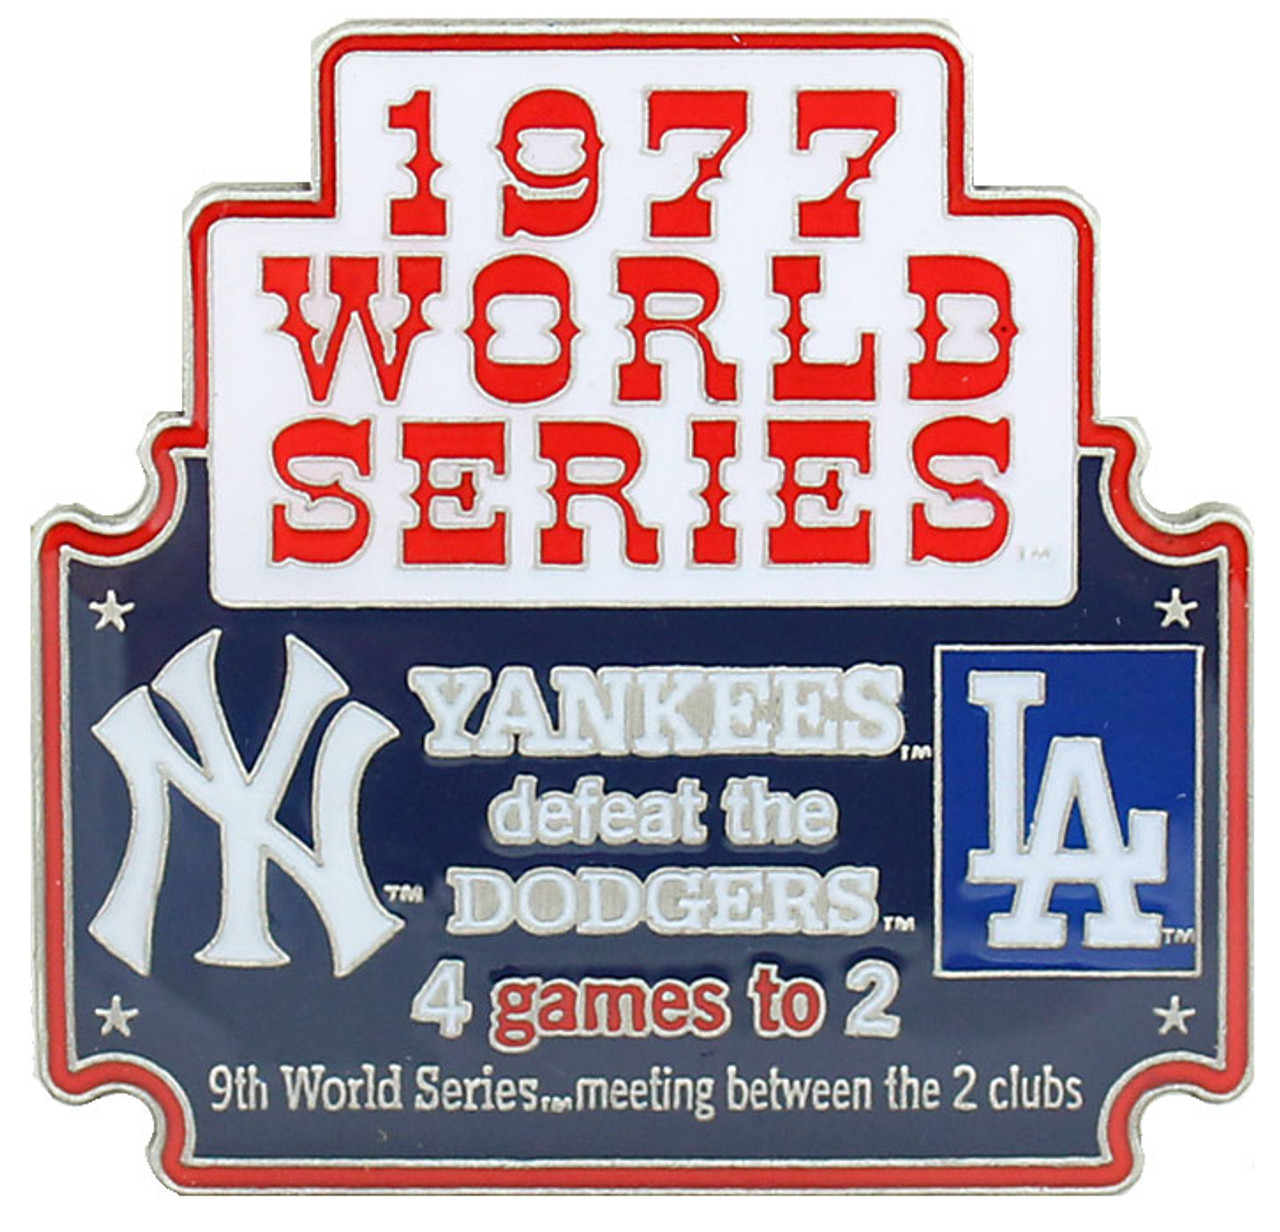 1977 Vintage World Series Jersey Patch (Dodgers vs Yankees)